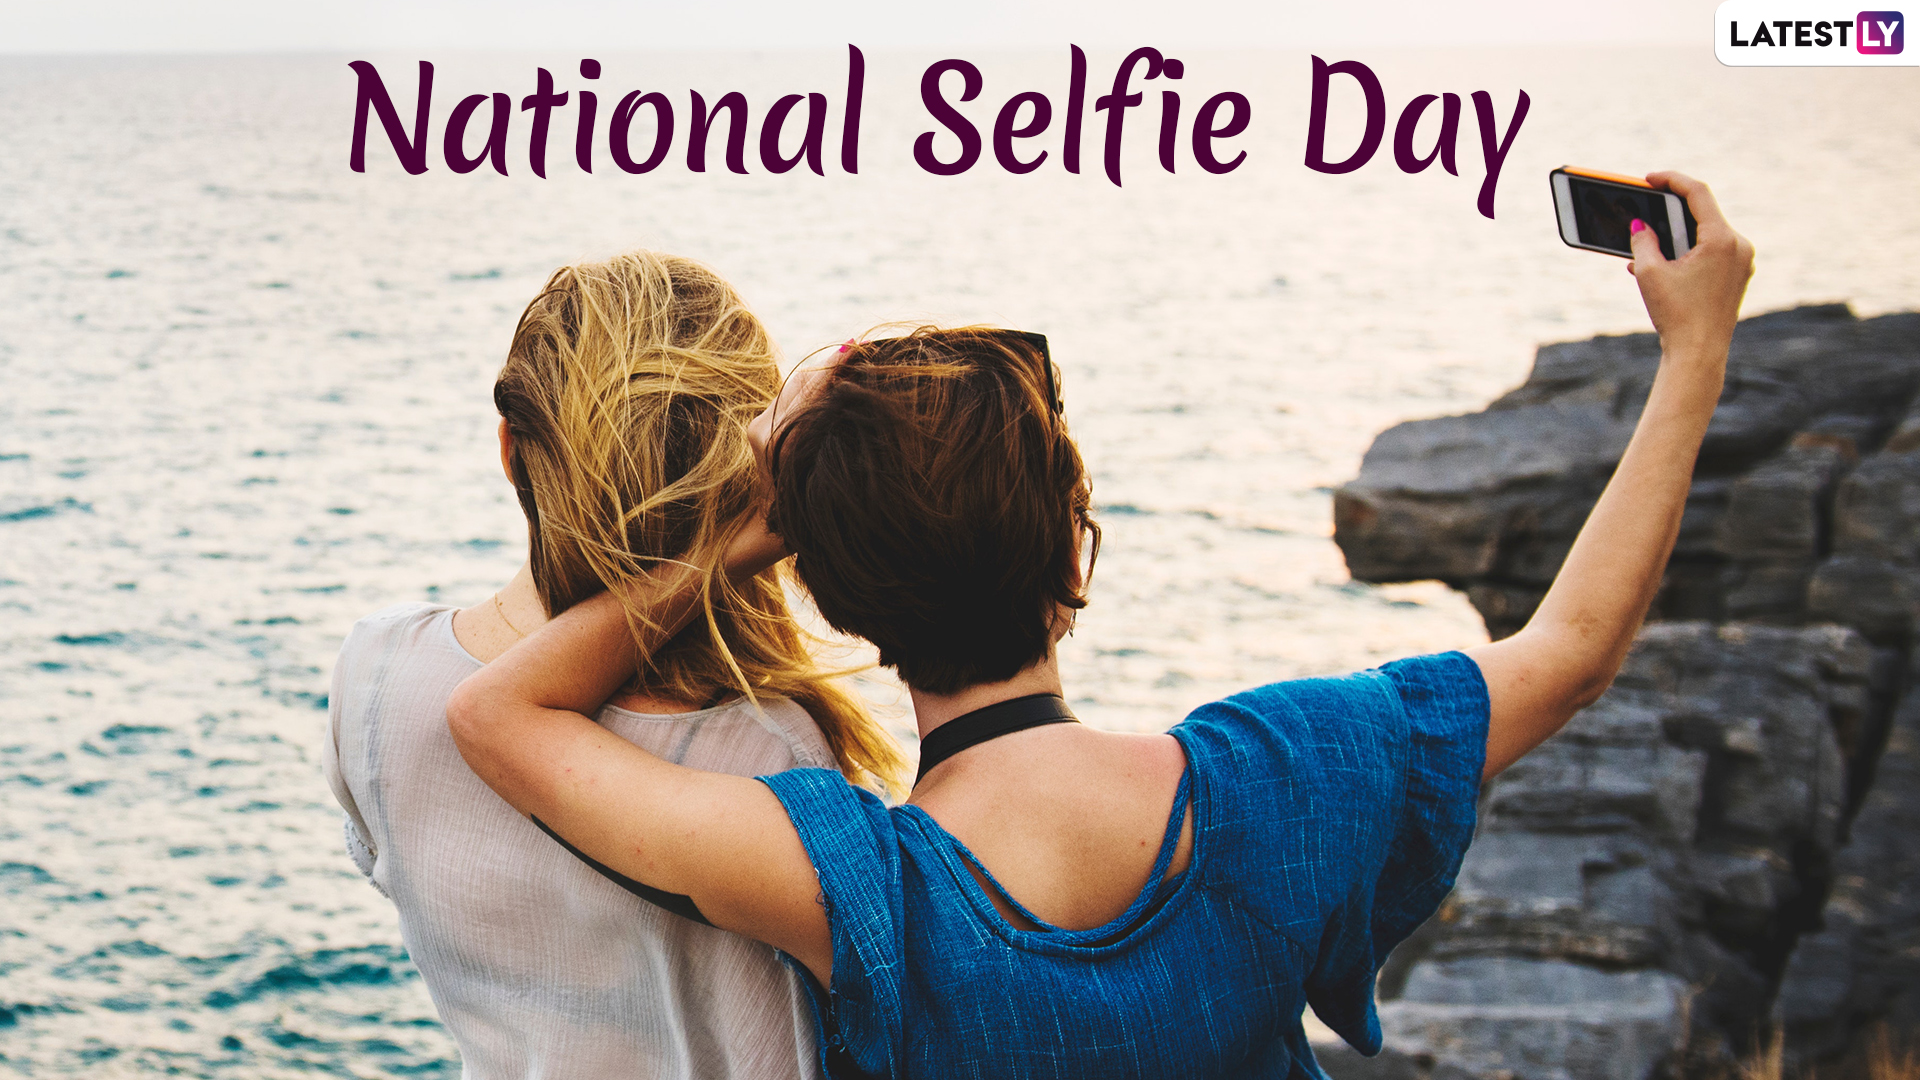 Festivals And Events News Fascinating Facts About Selfies To Post On